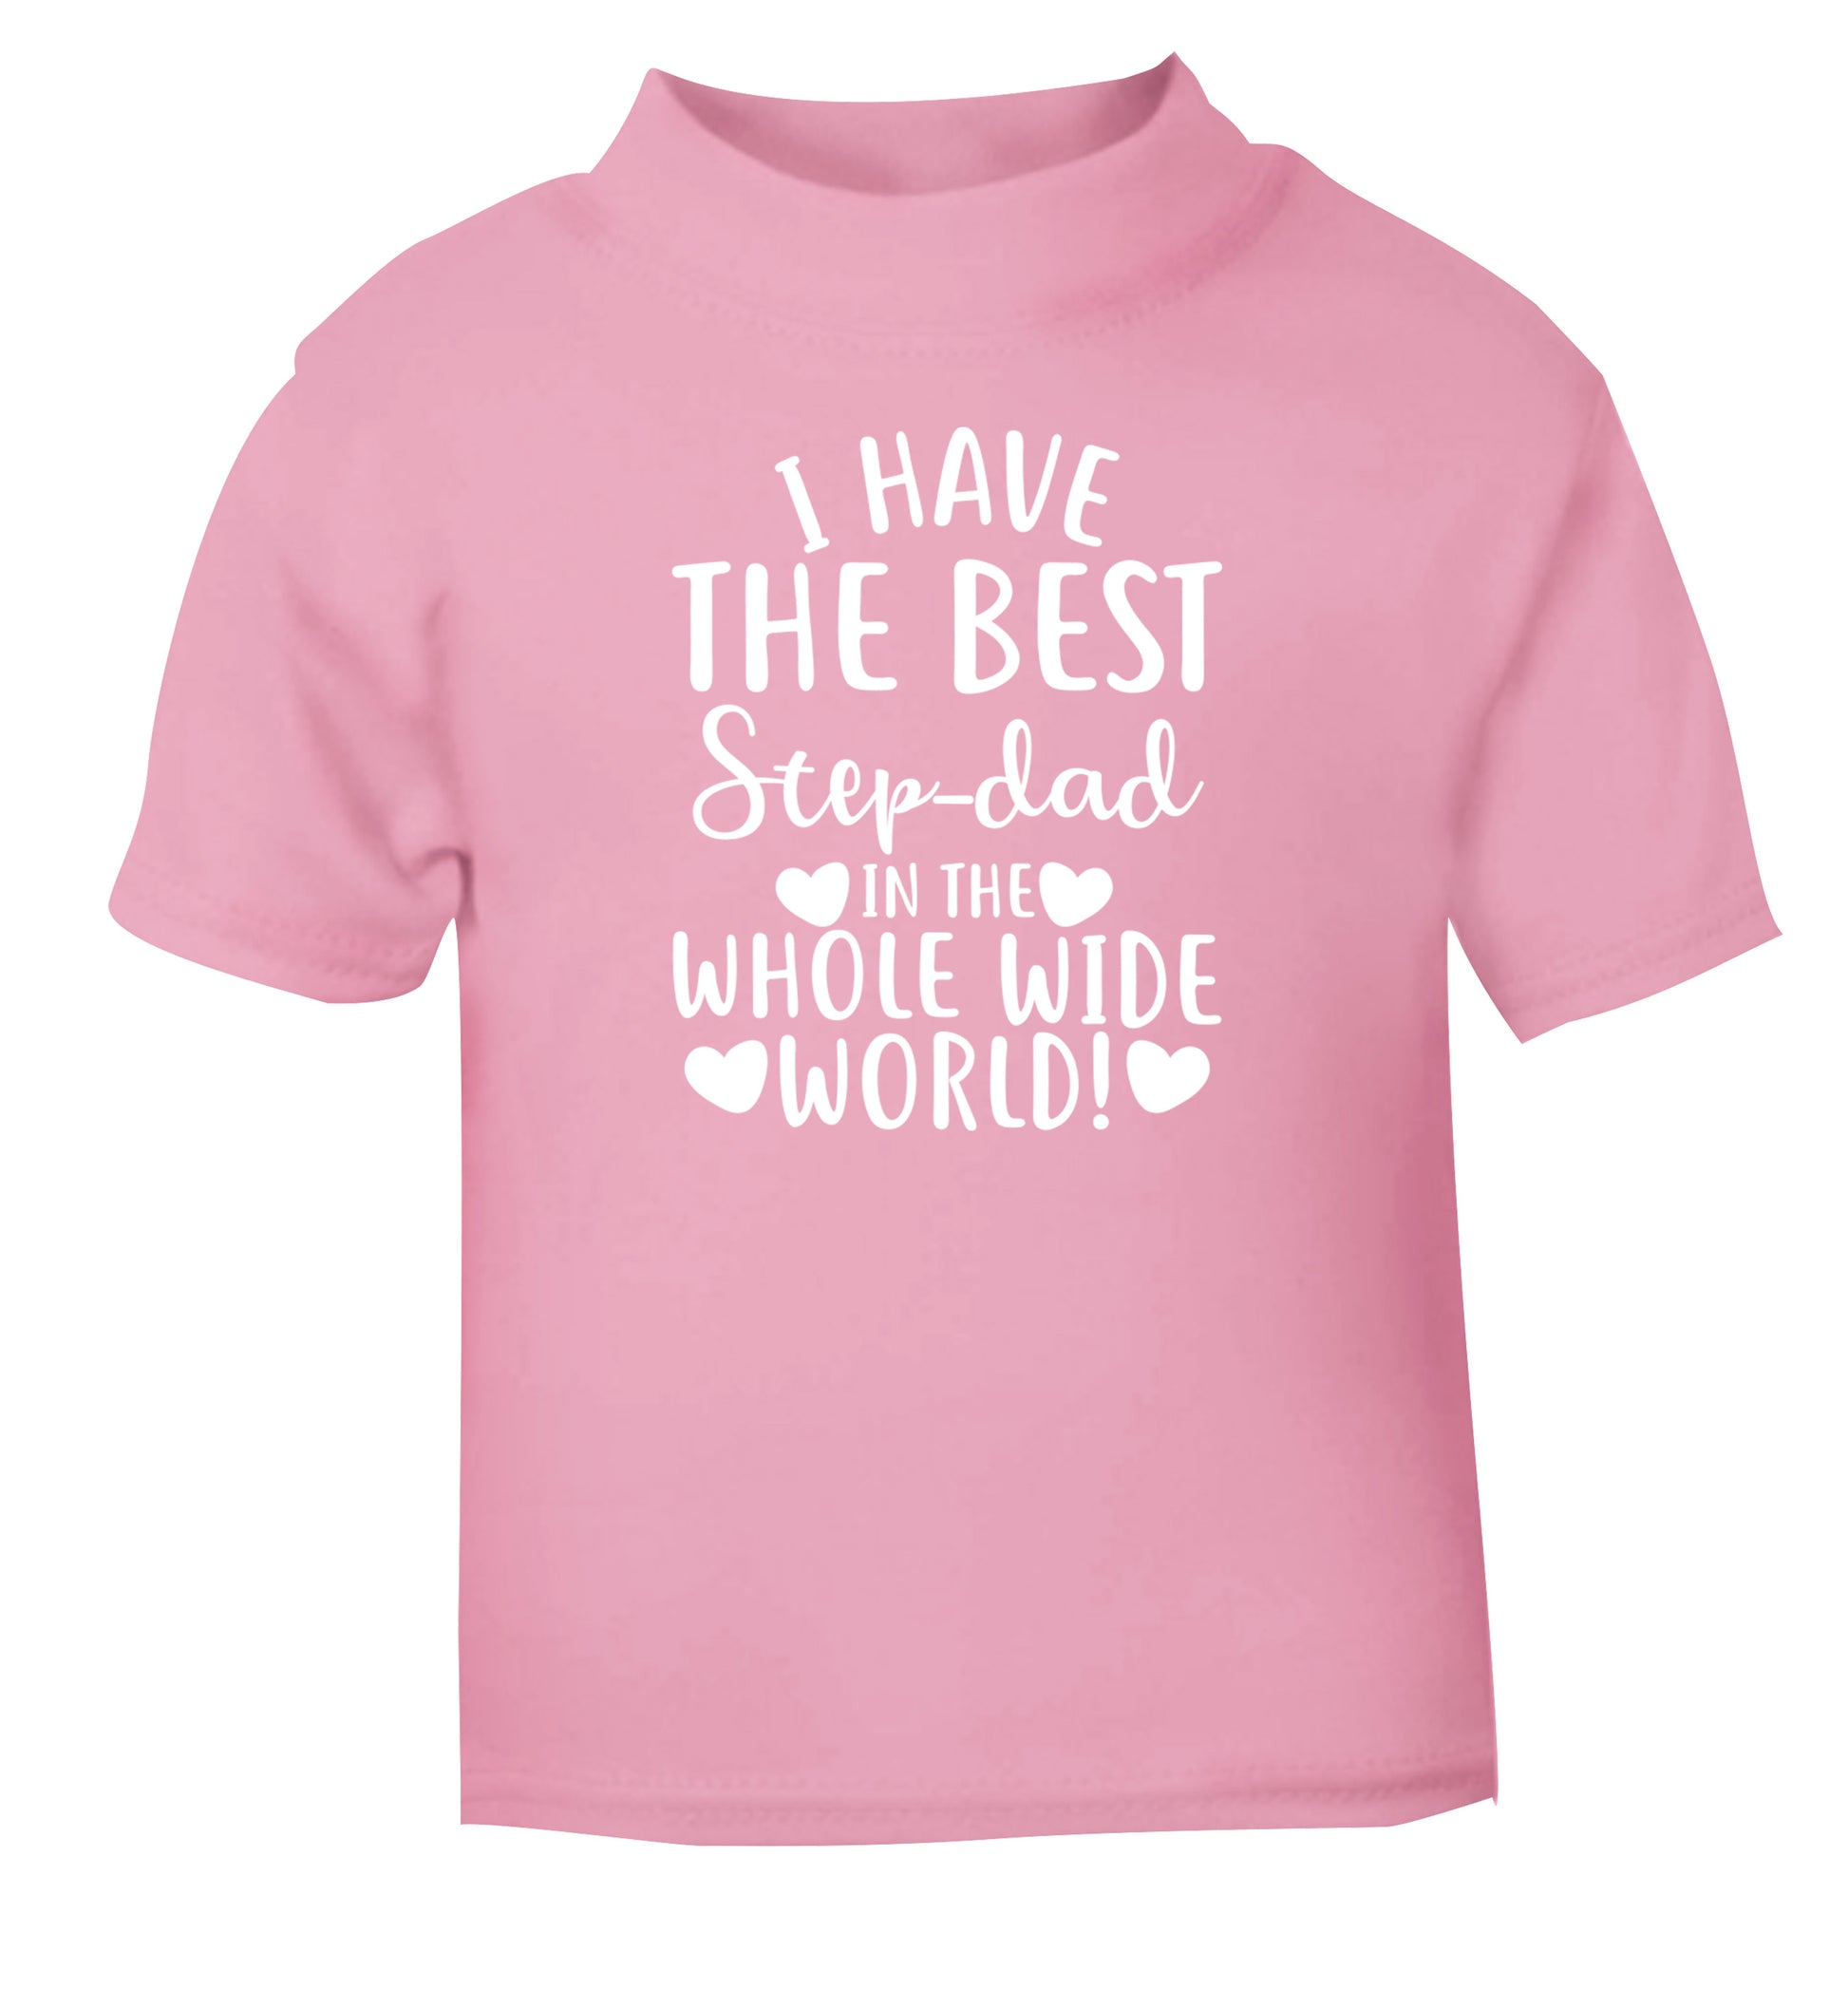 I have the best step-dad in the whole wide world! light pink Baby Toddler Tshirt 2 Years